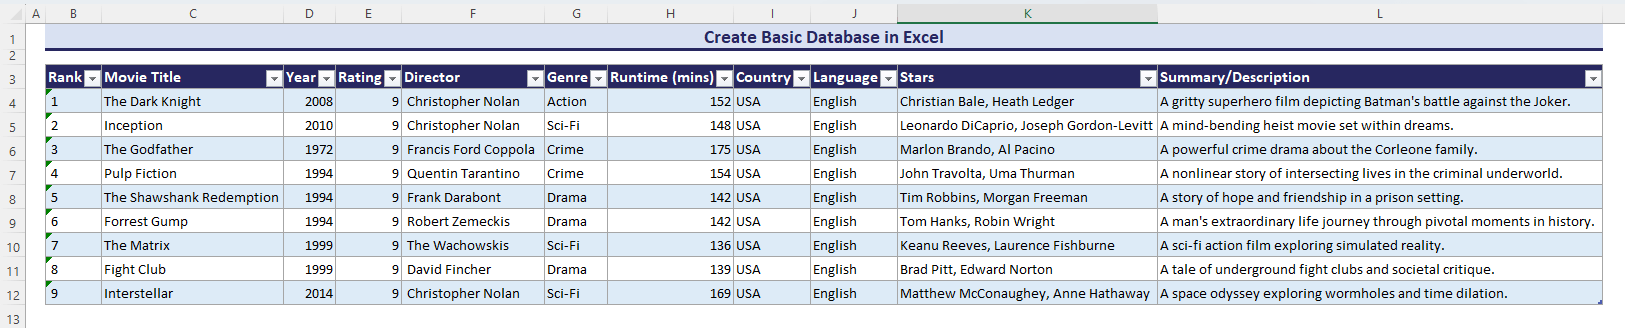 Creating basic database in Excel